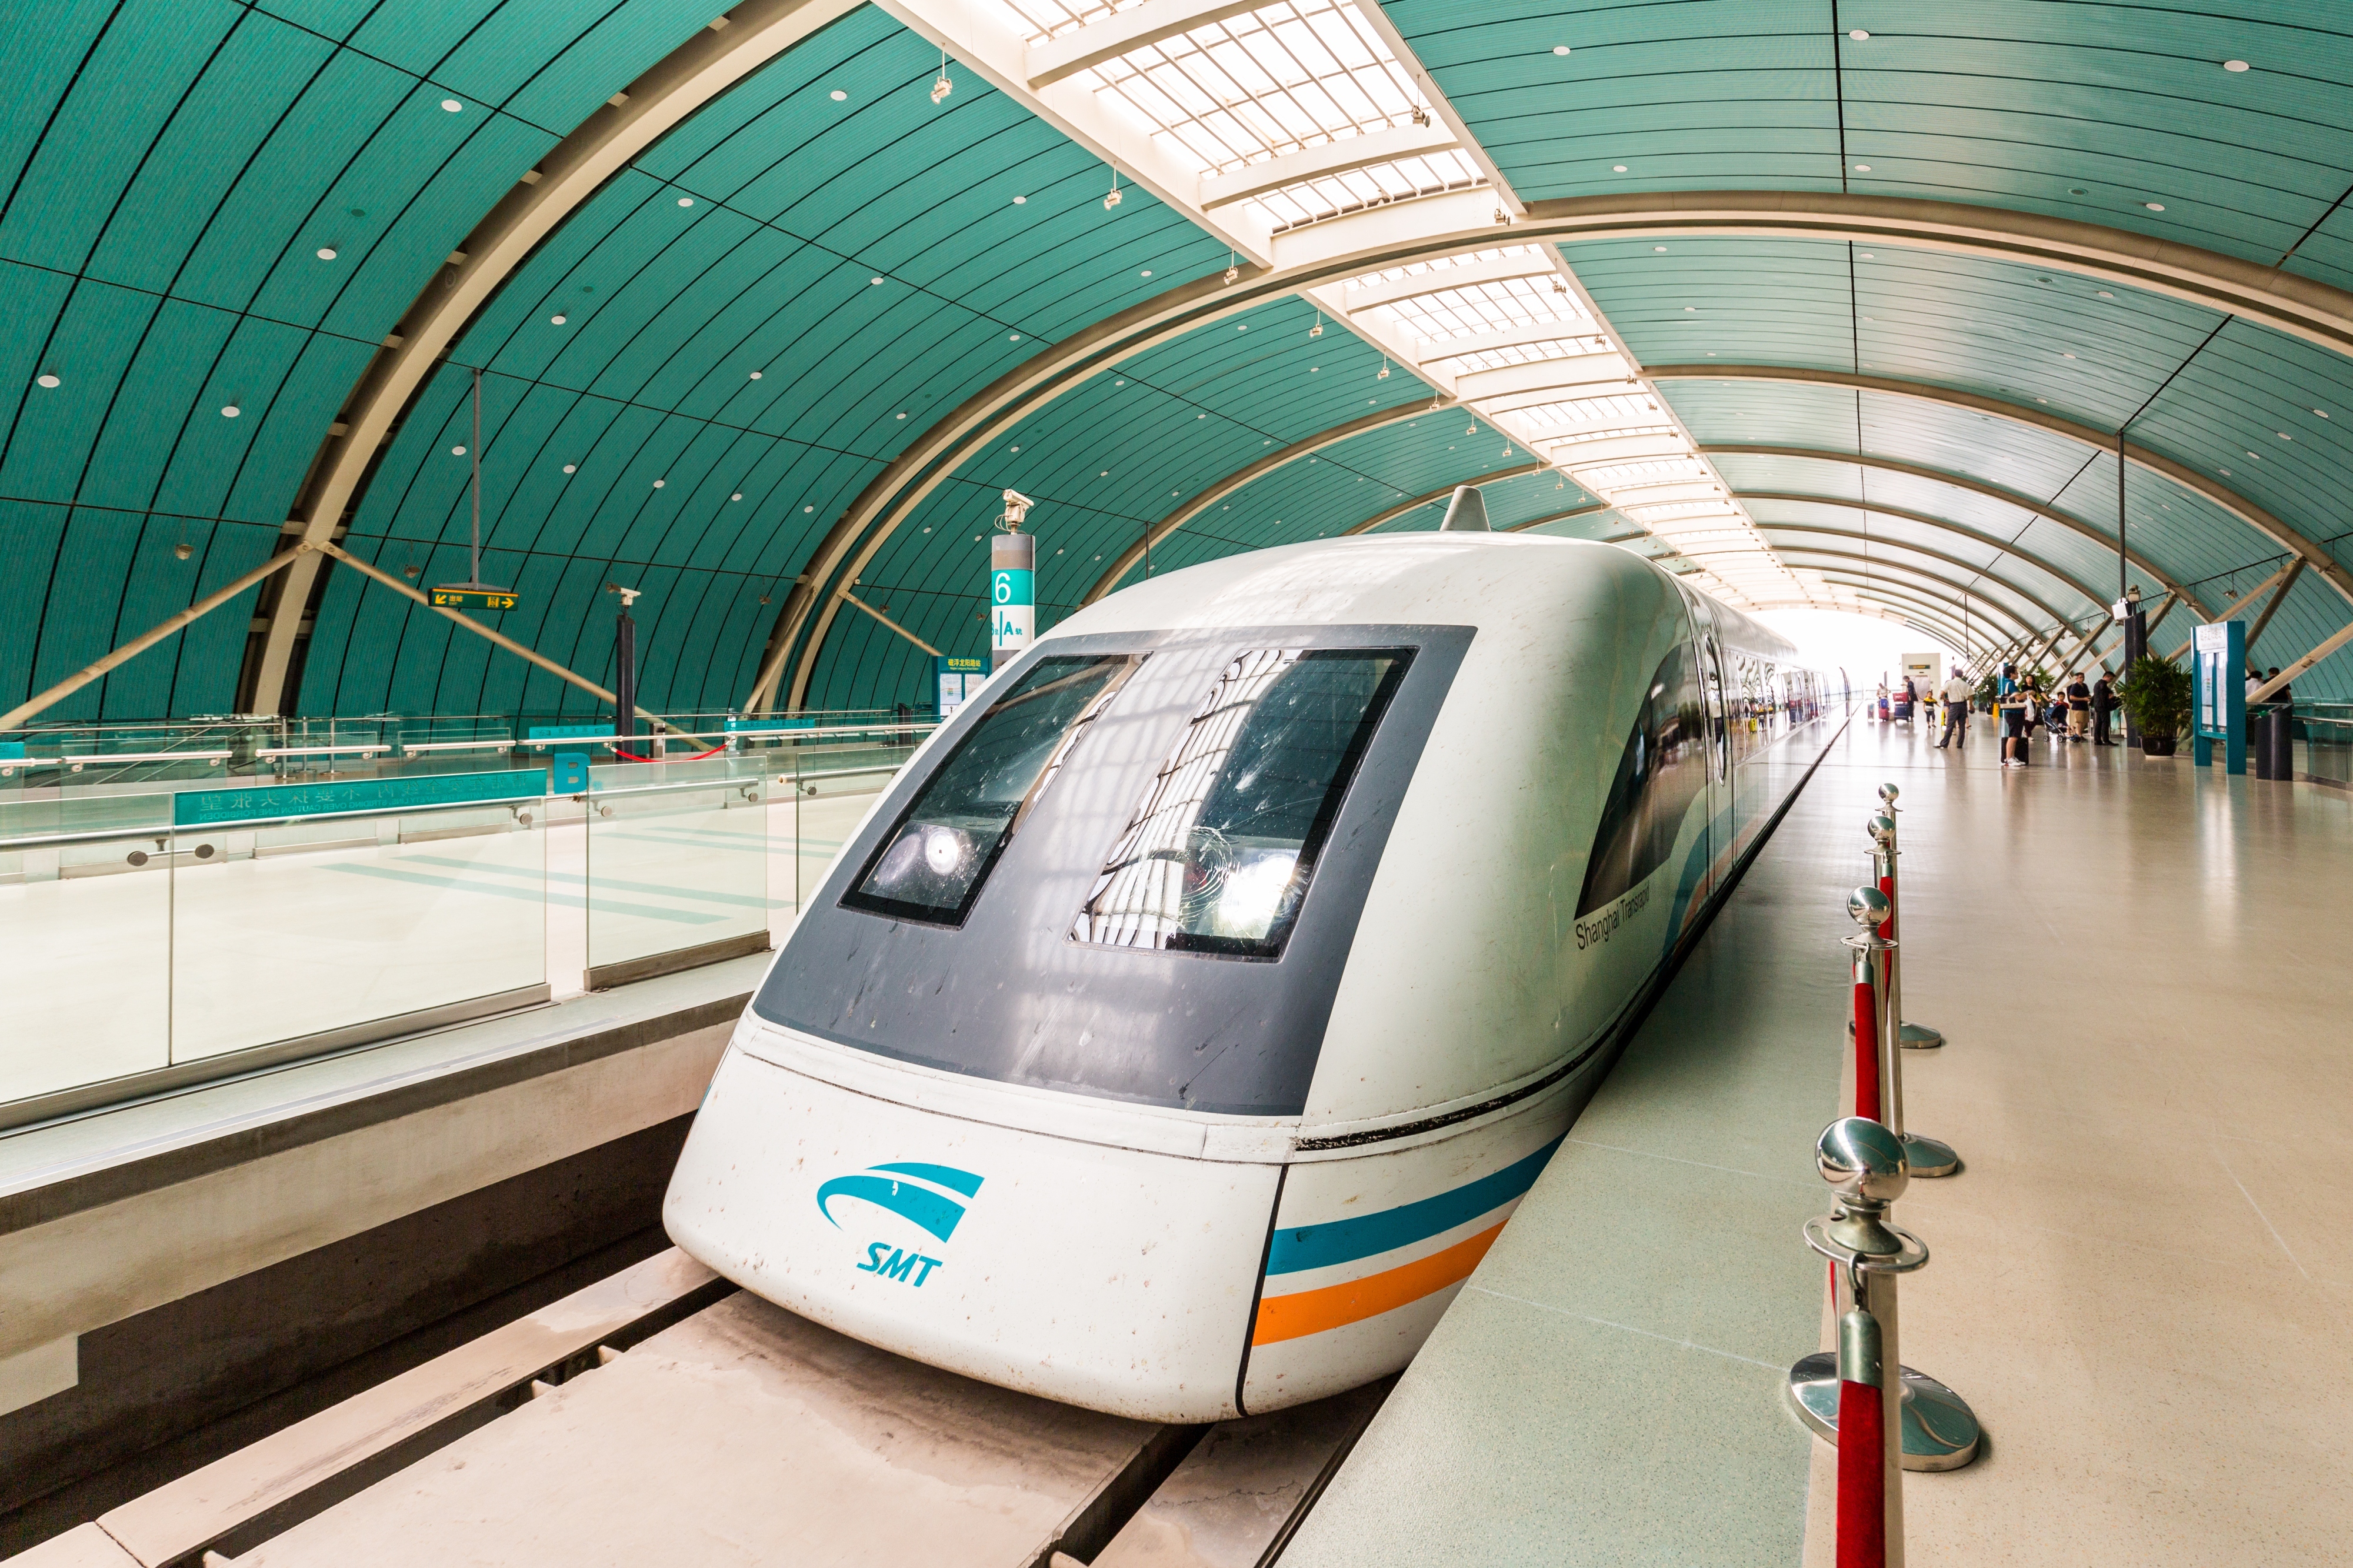 Shanghai Maglev Train The Fastest Train From Pvg To Downtown Shanghai Travel Notes And Guides Trip Com Travel Guides